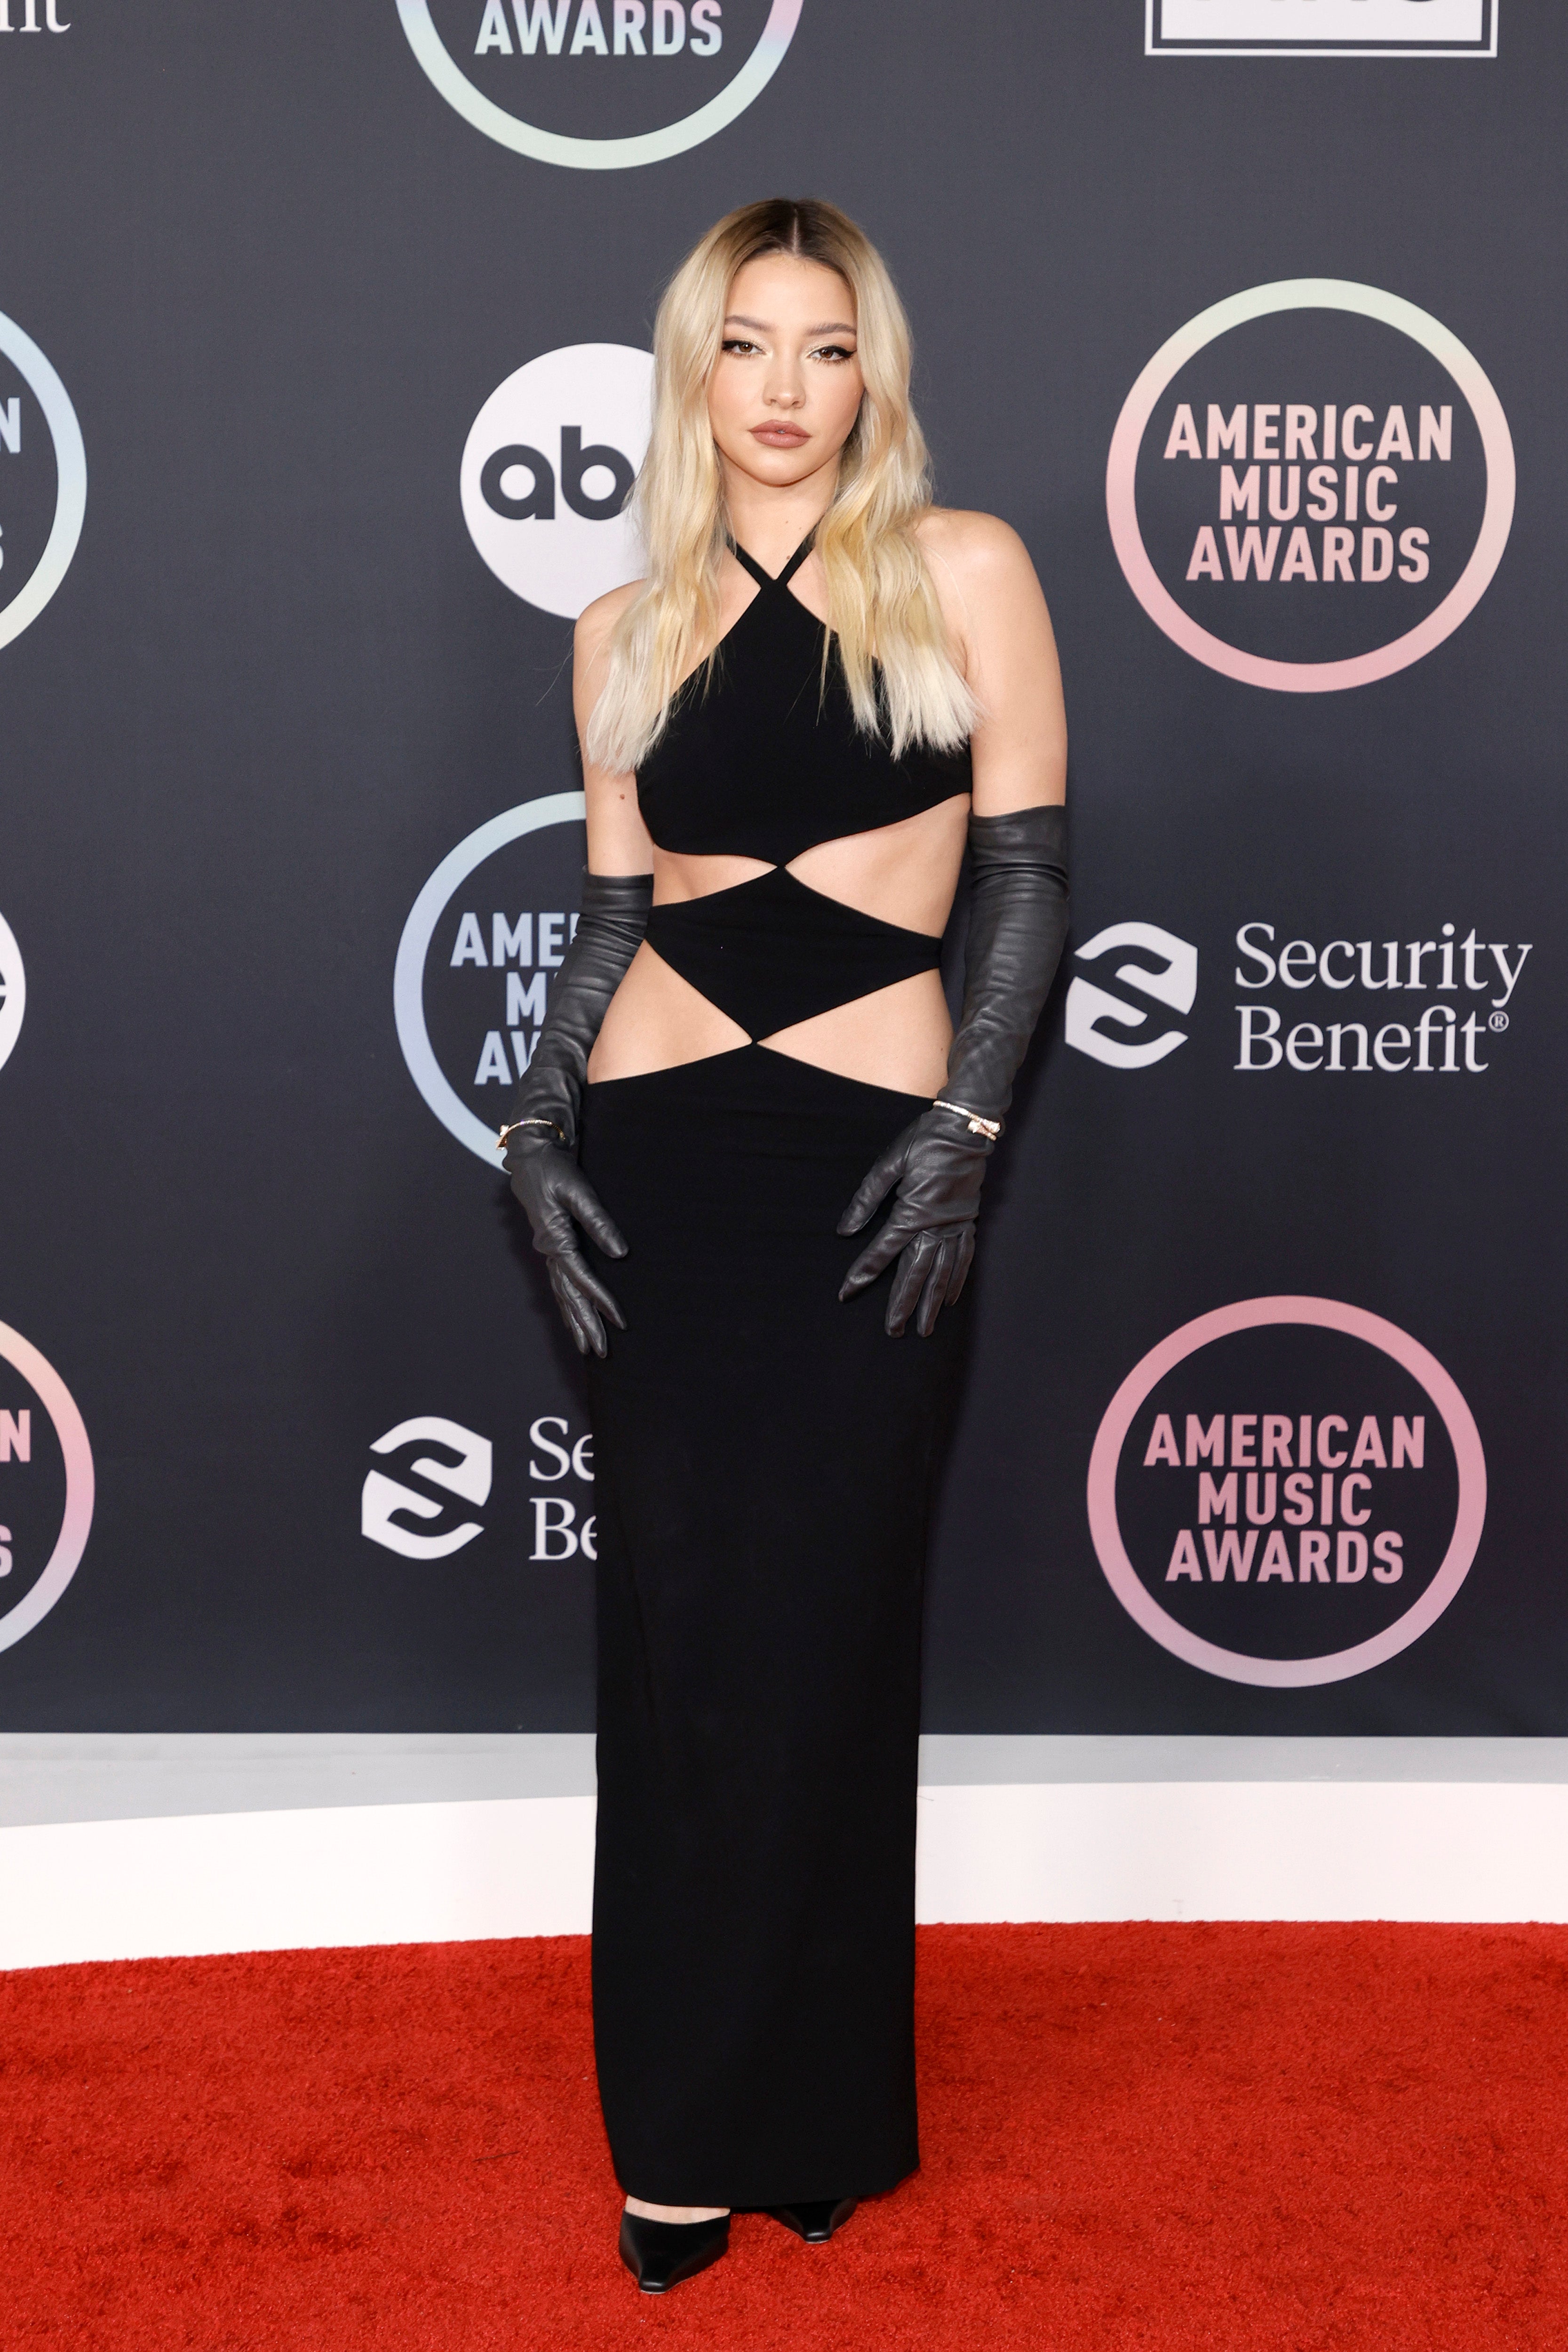 Madelyn Cline attends the 2021 American Music Awards